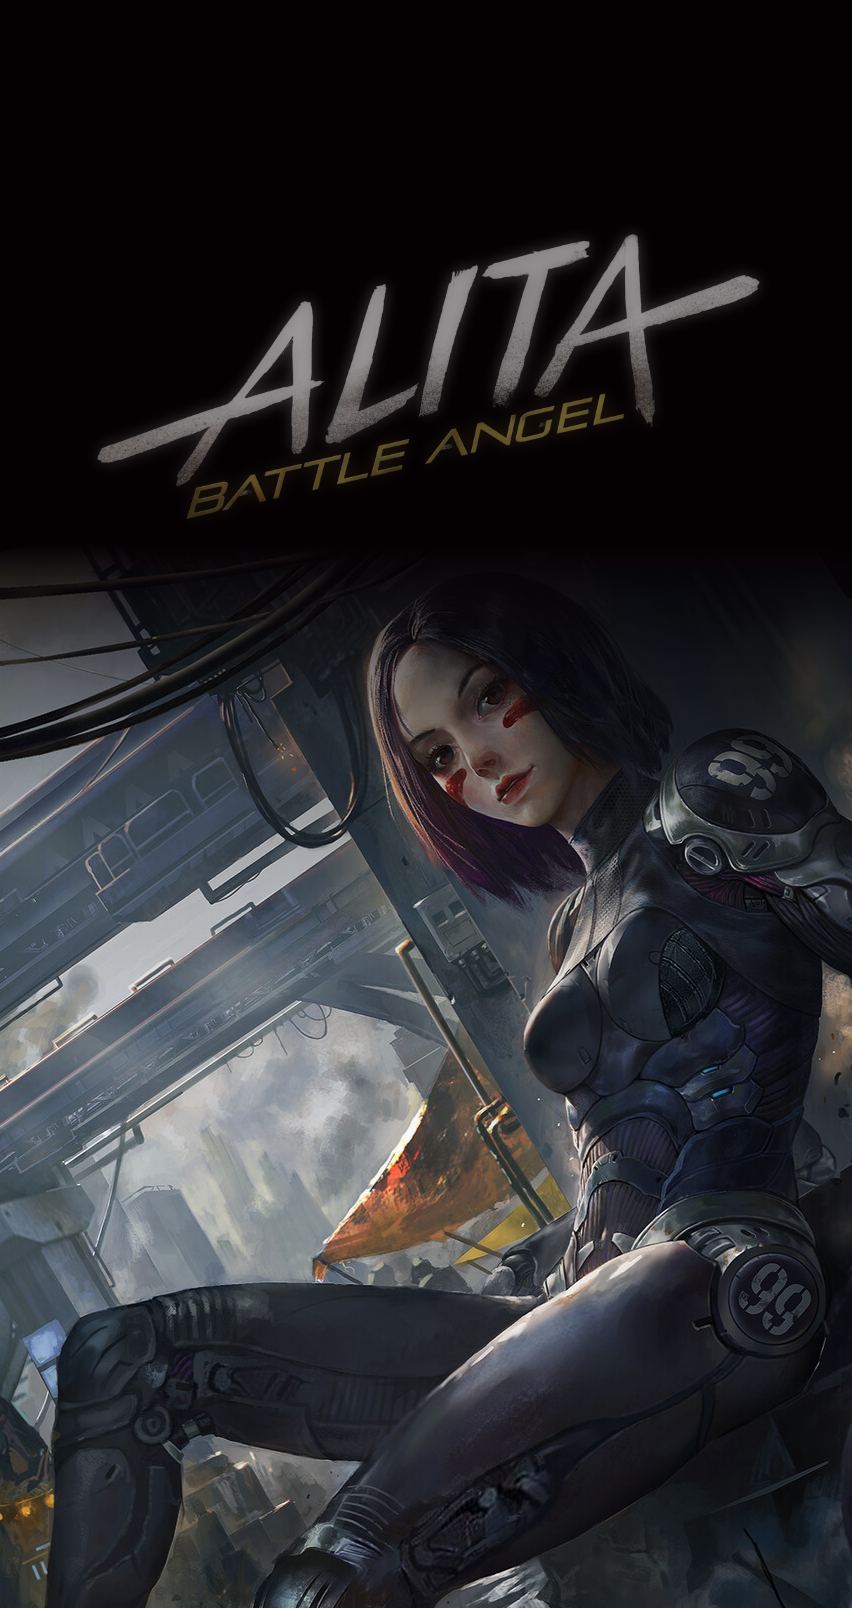 Alita: Battle Angel Wallpapers, Pictures, Images